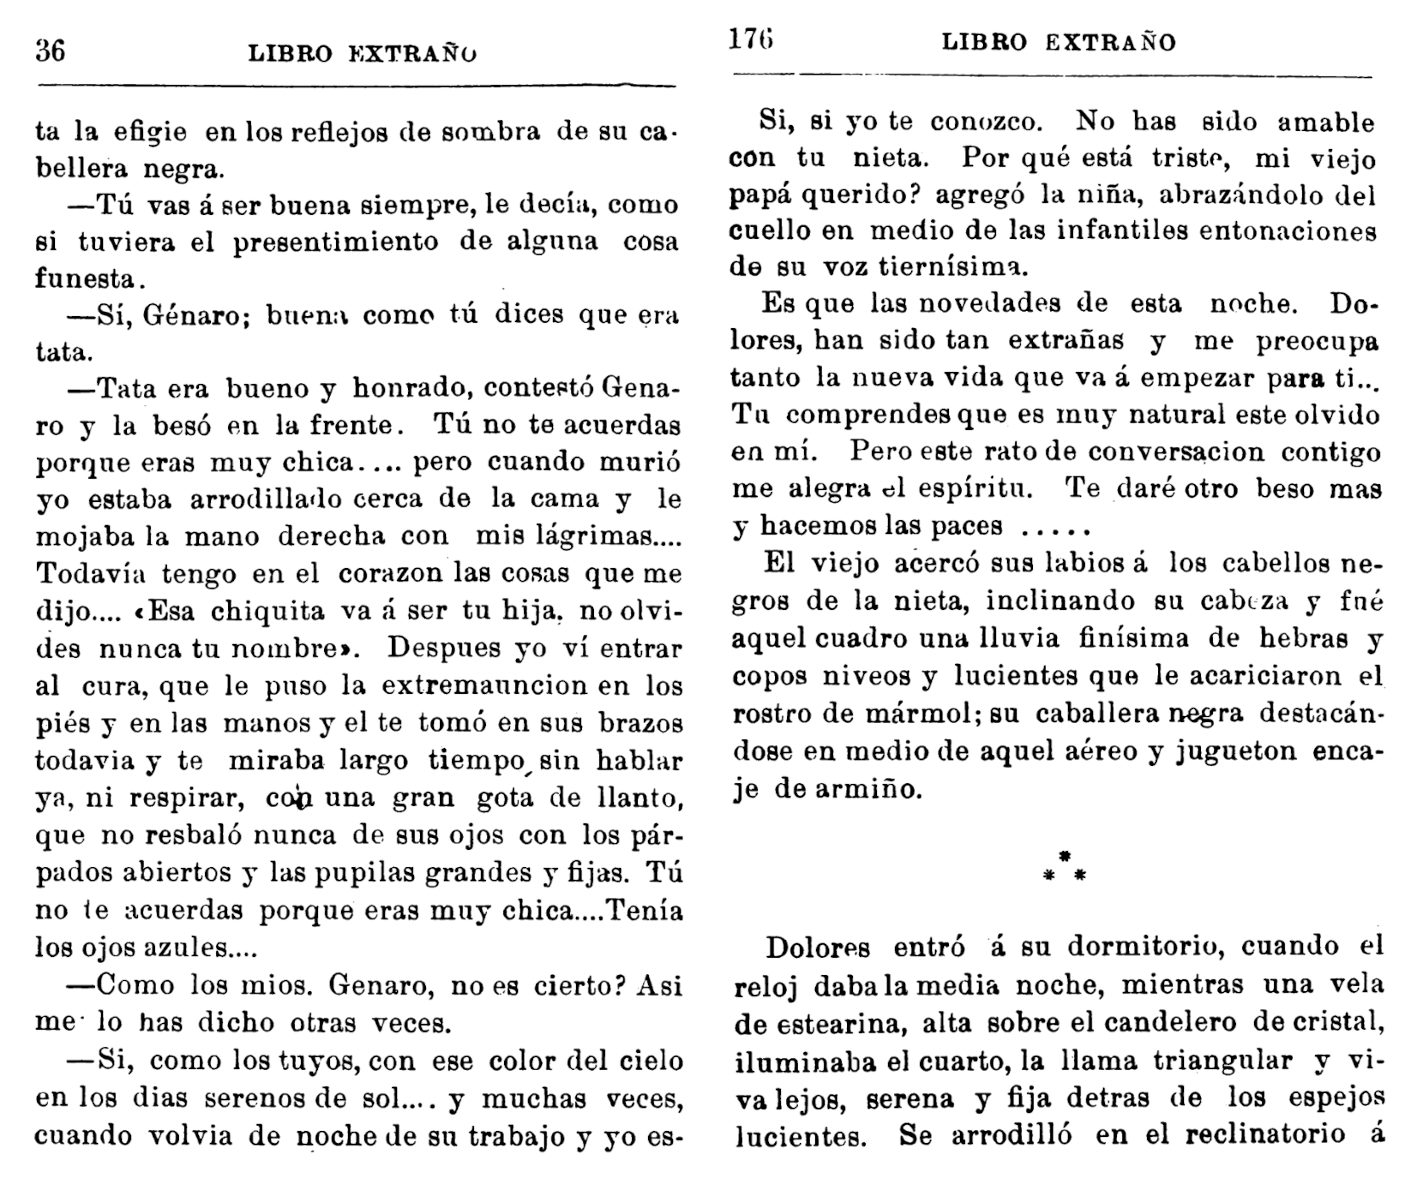 Pages with direct speech from “Libro extraño” by Francisco
                                 Sicardi, with initial speech signs (left page) and without speech
                                 signs (right page).